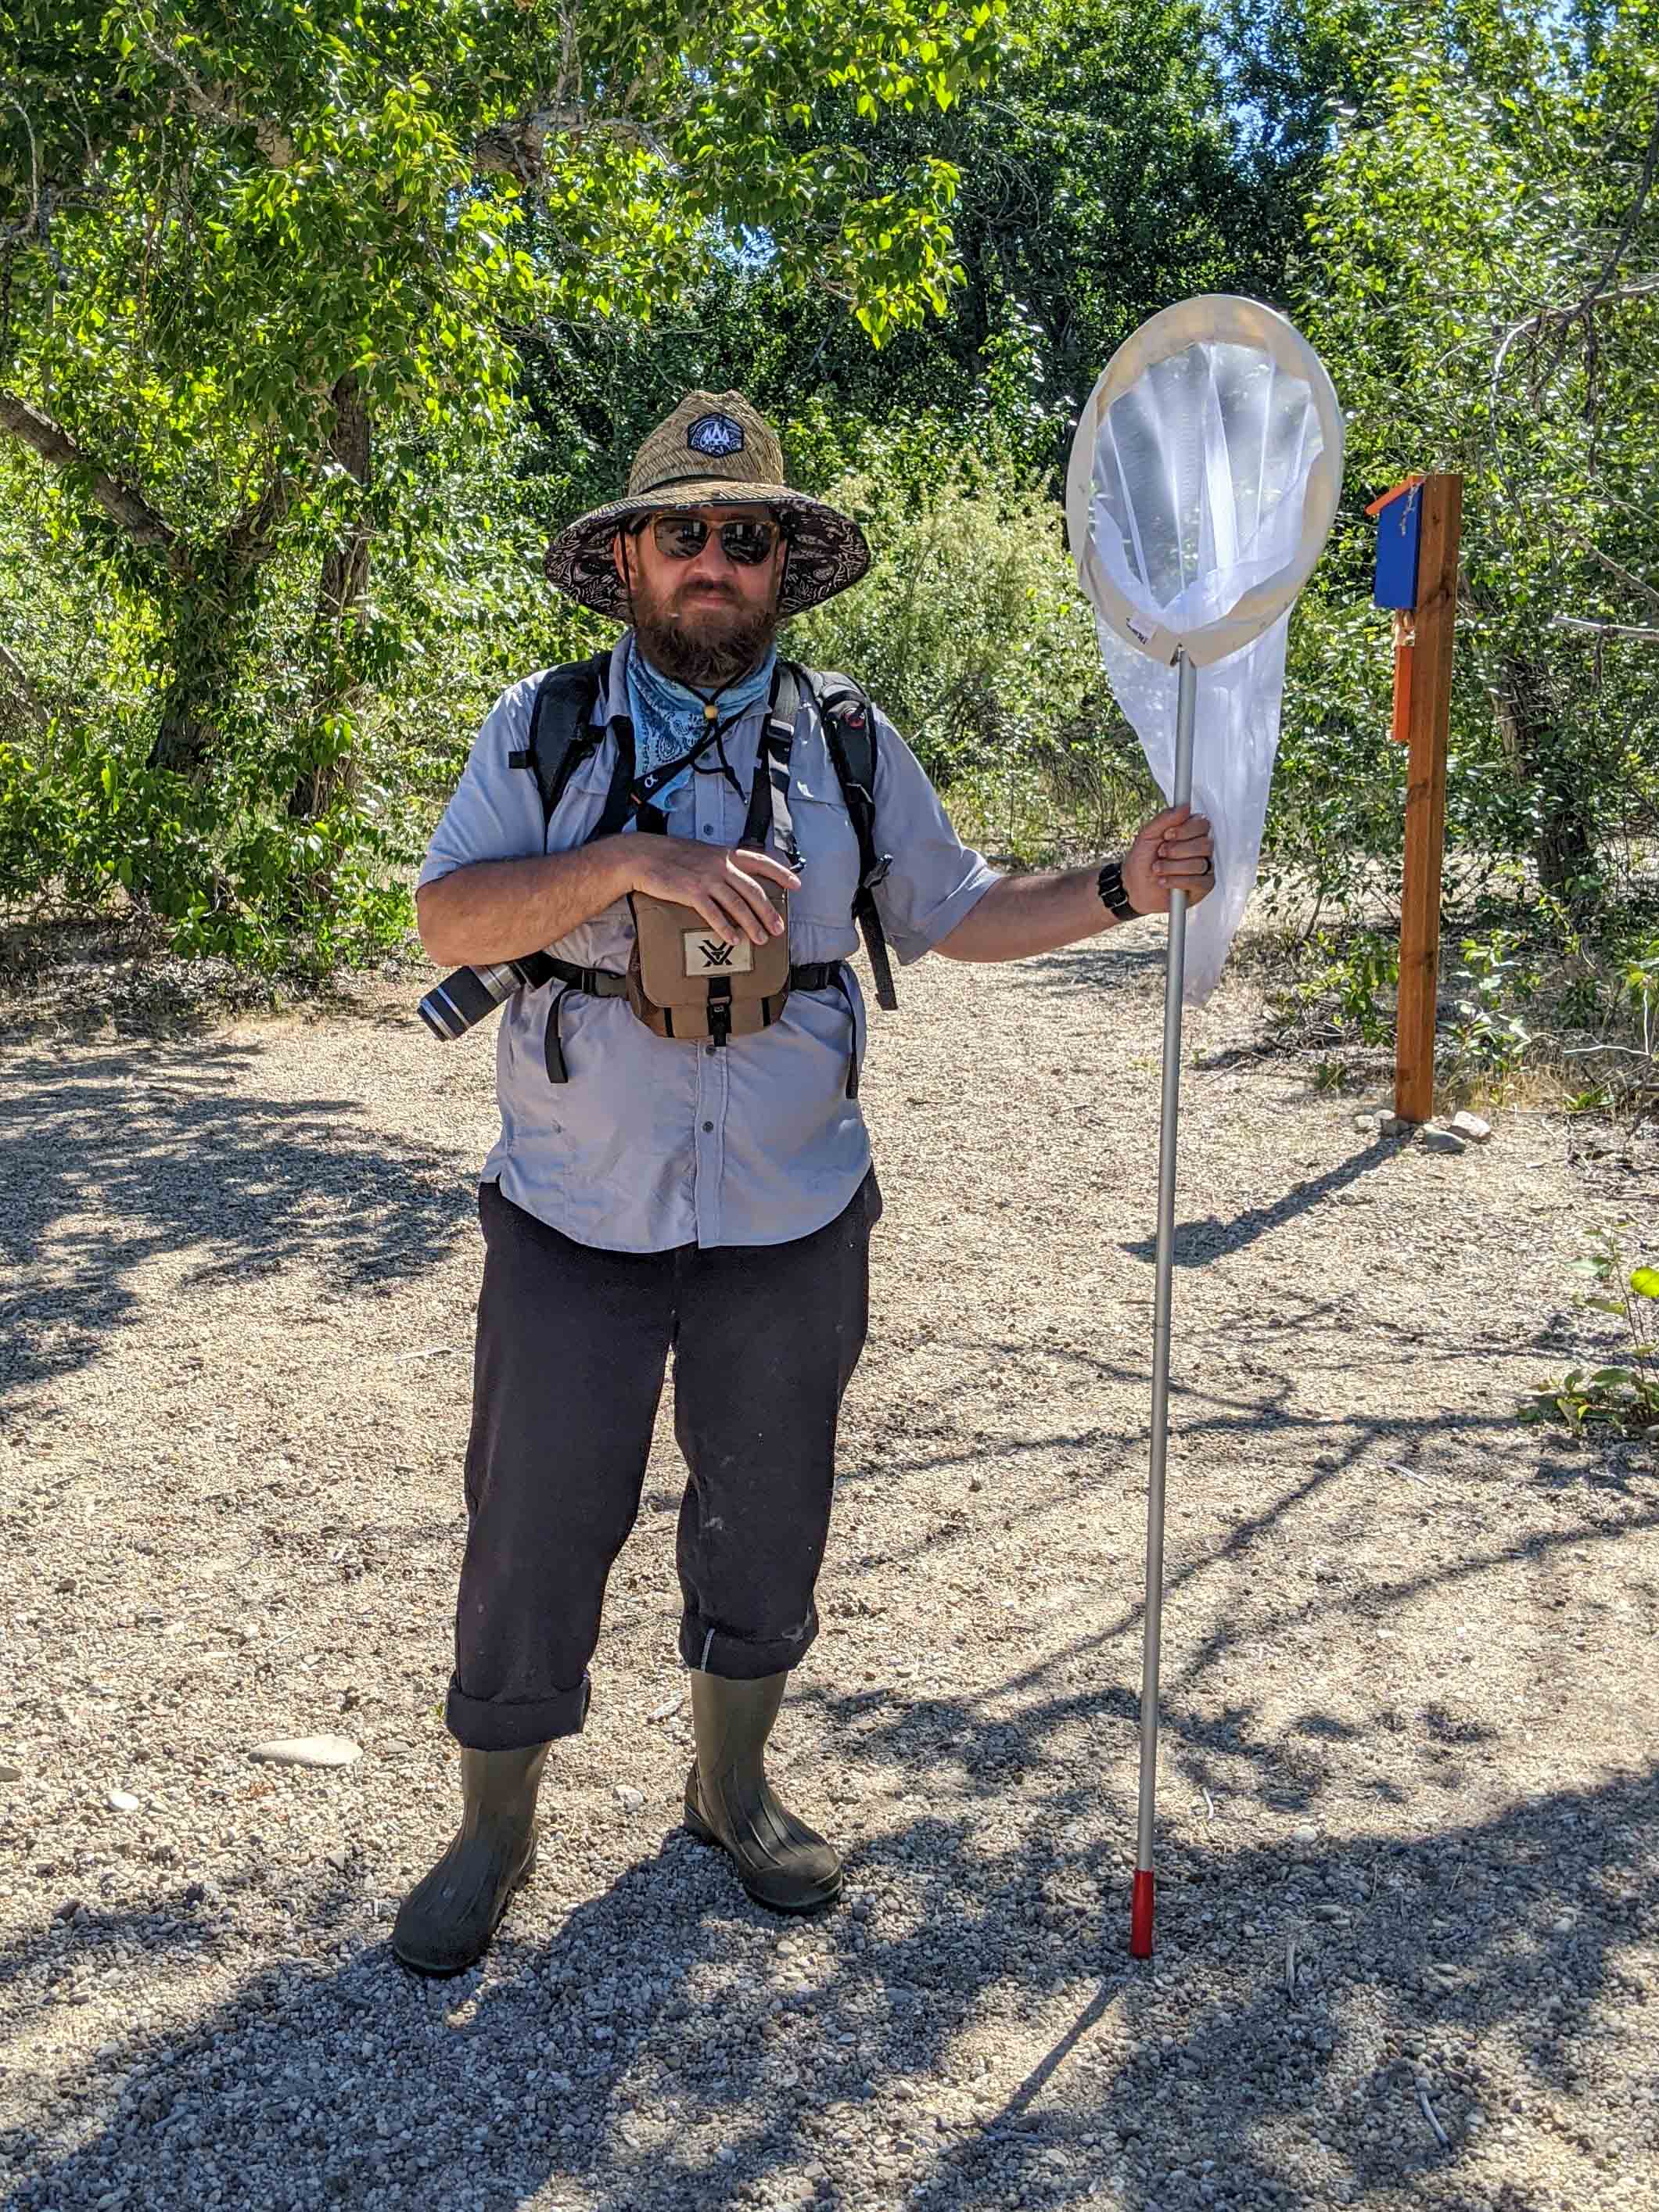 a tall man with a beard stands under cottonwood trees wearing rubber boots and a large brimmed straw sunhat, holding an insect net